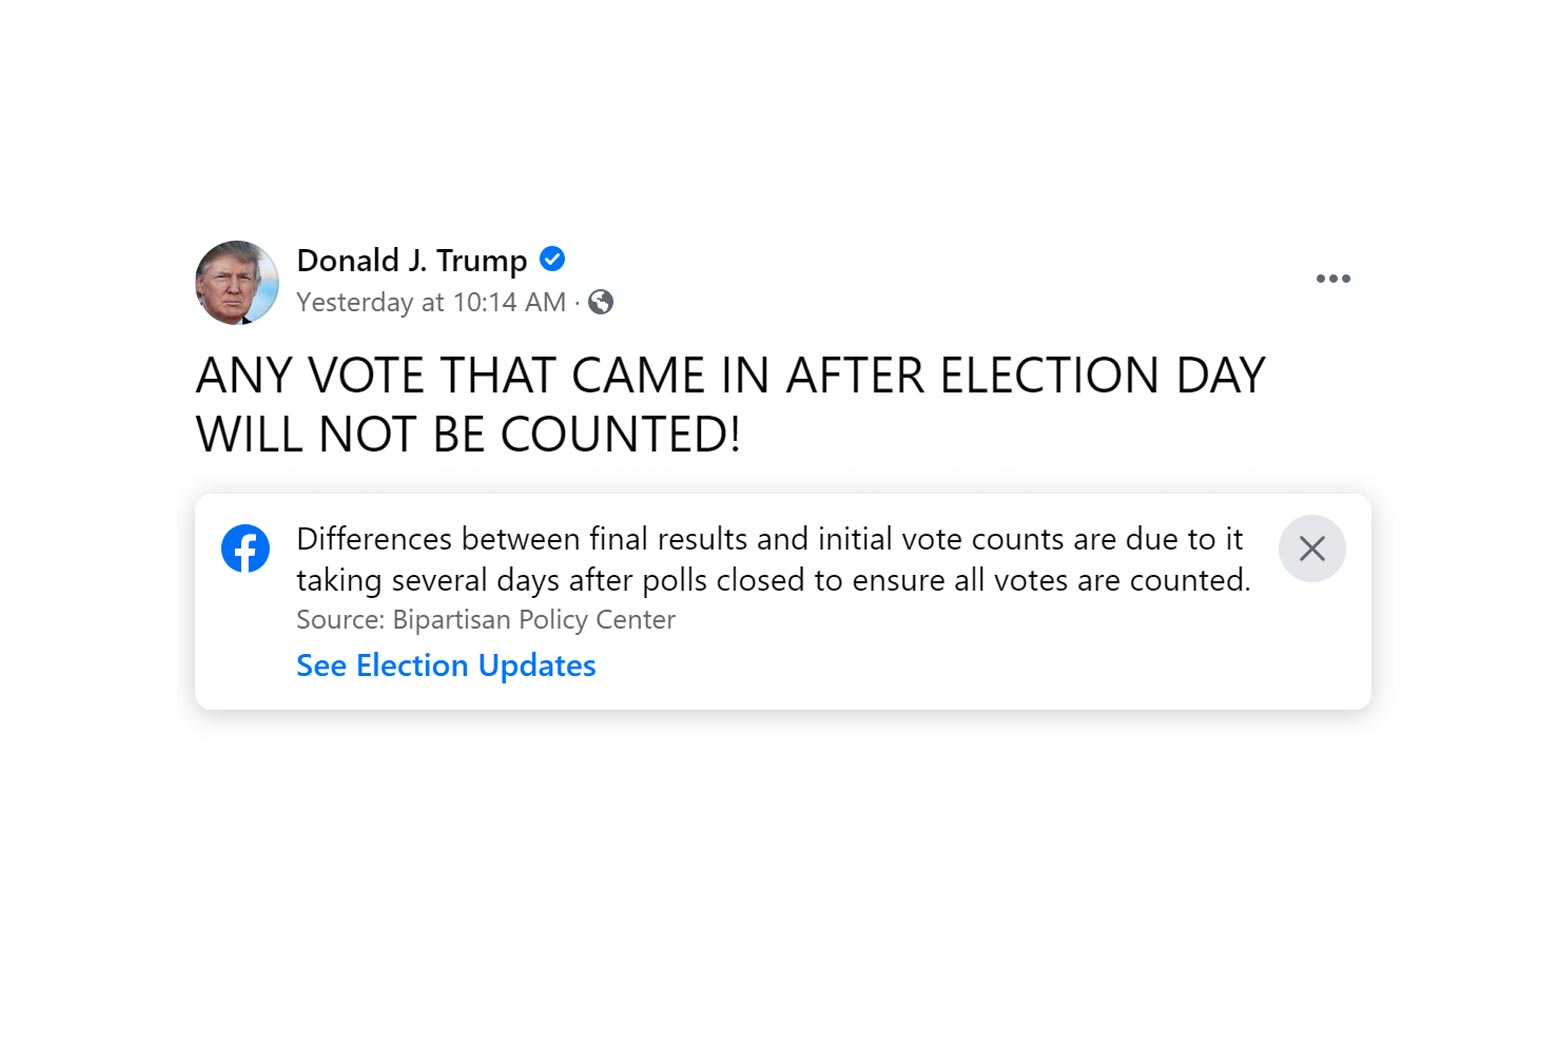 Trump post that says “ANY VOTE THAT CAME IN AFTER ELECTION DAY WILL NOT BE COUNTED!” with a Facebook label under it that says “Differences between final results and initial vote counts are due to it taking several days after polls closed to ensure all votes are counted.”